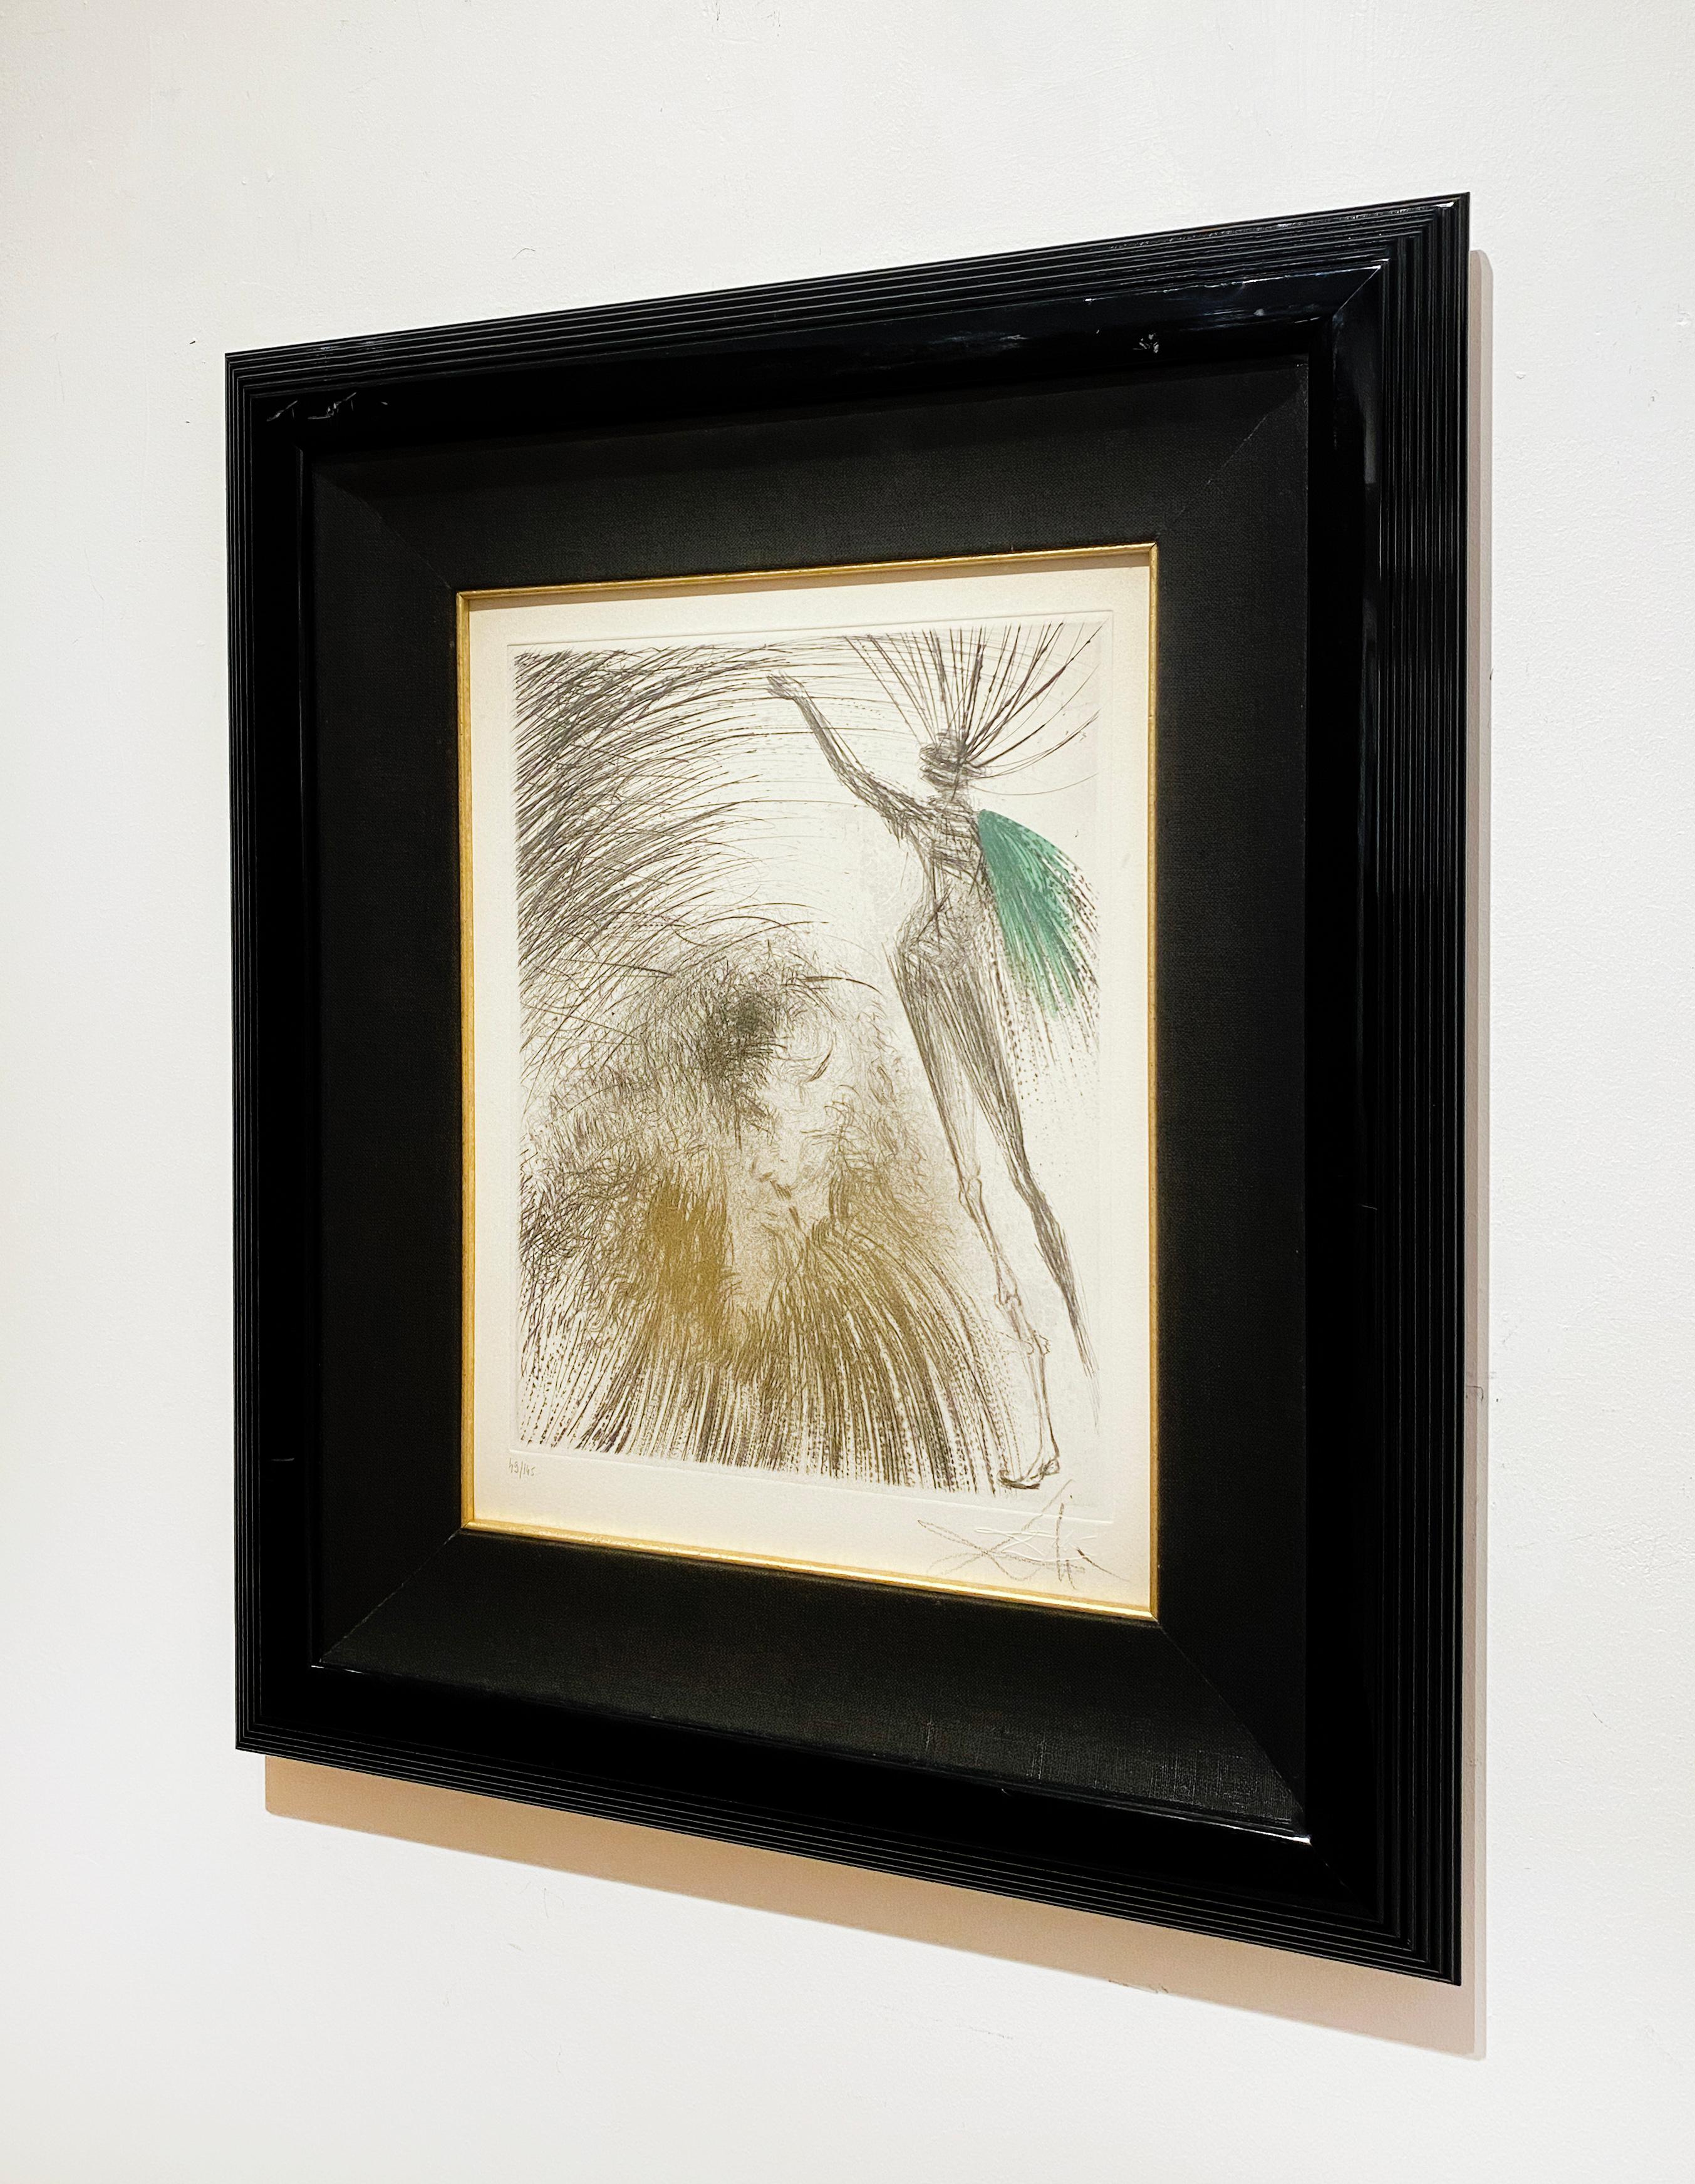 Artist:  Dali, Salvador
Title:  The Old Faust
Series:  Faust
Date:  1969
Medium:  drypoint
Framed Dimensions:  22.5